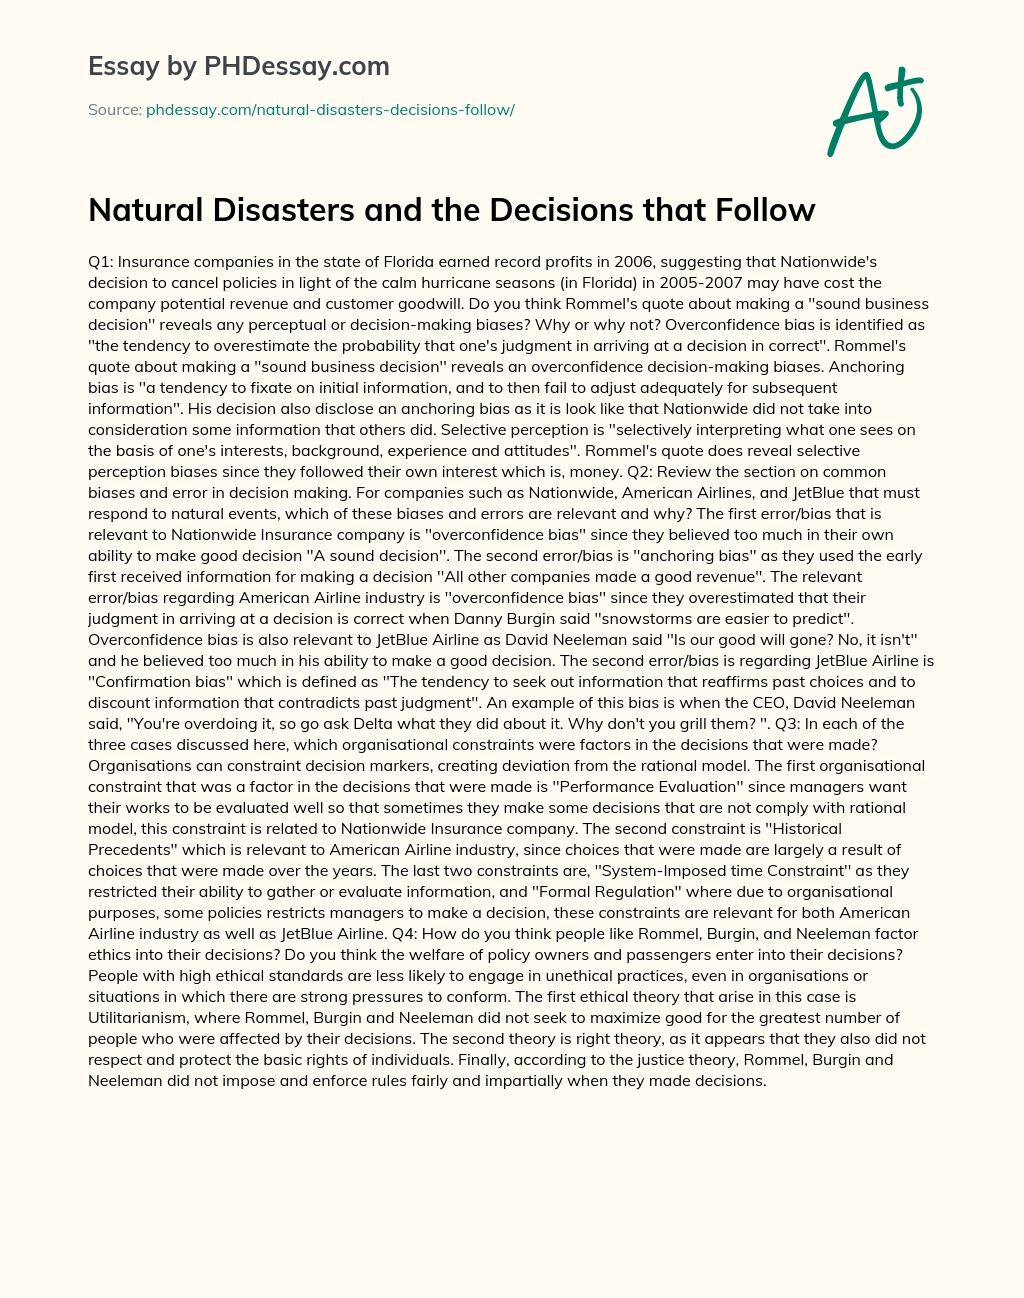 Natural Disasters and the Decisions that Follow essay